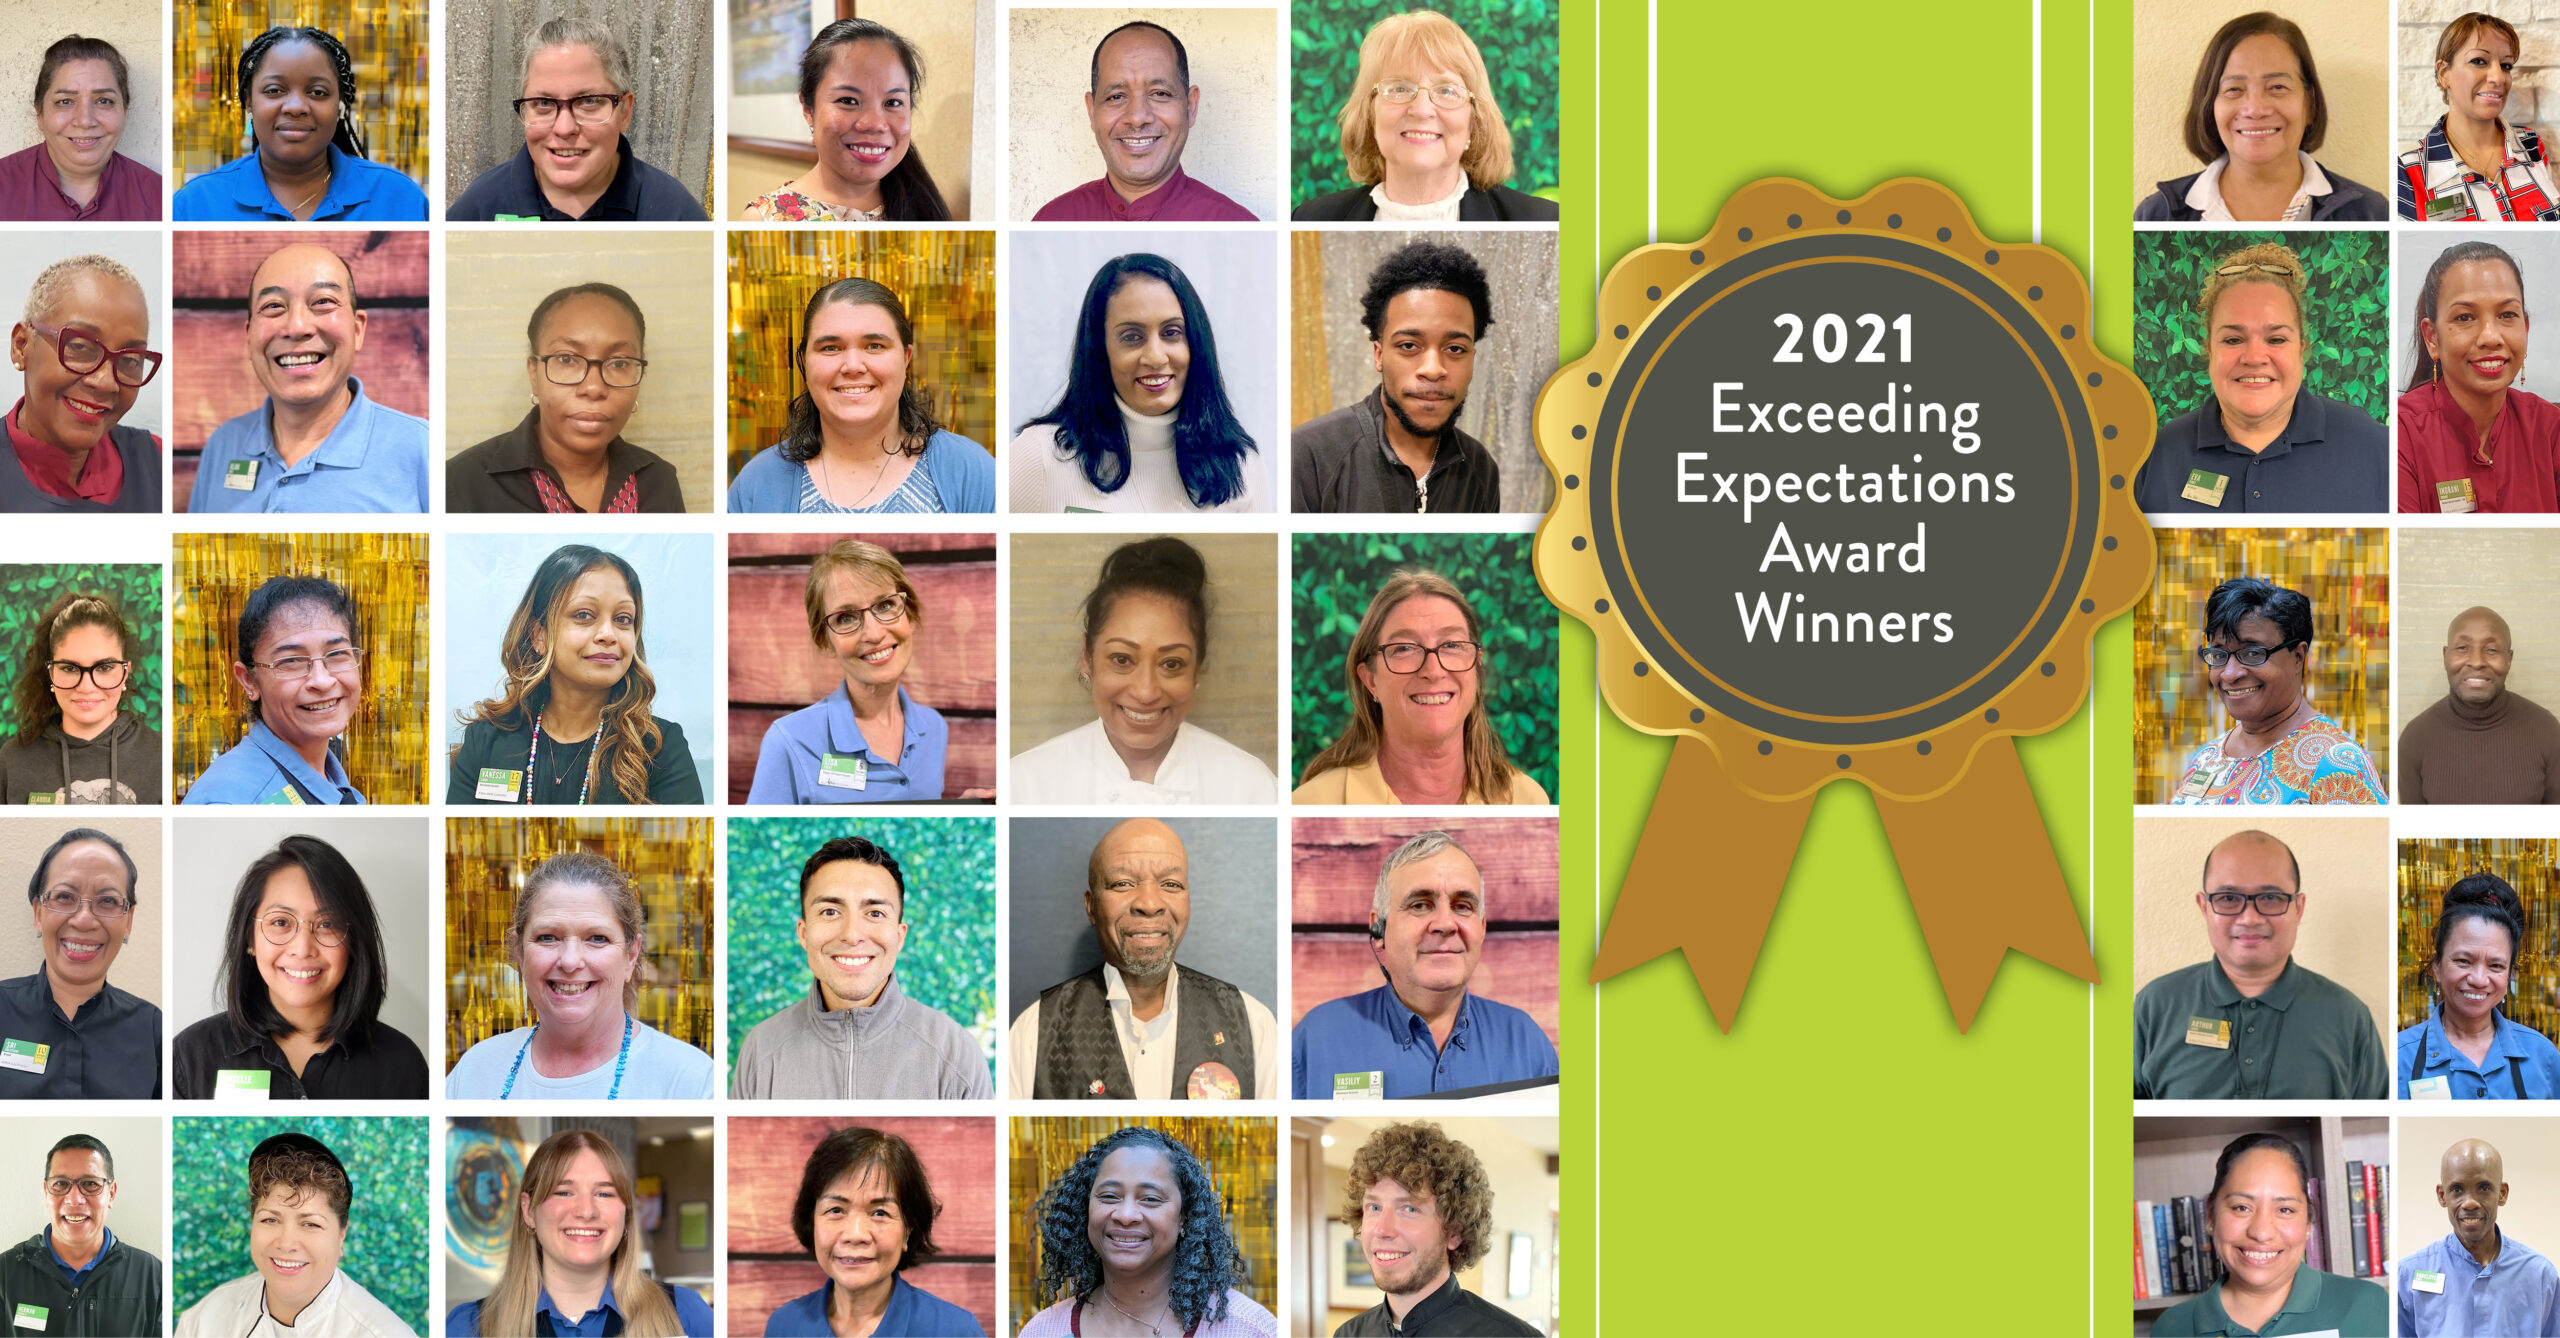 Collage of the Atria Senior Living 2021 Exceeding Expectations Award Winners.